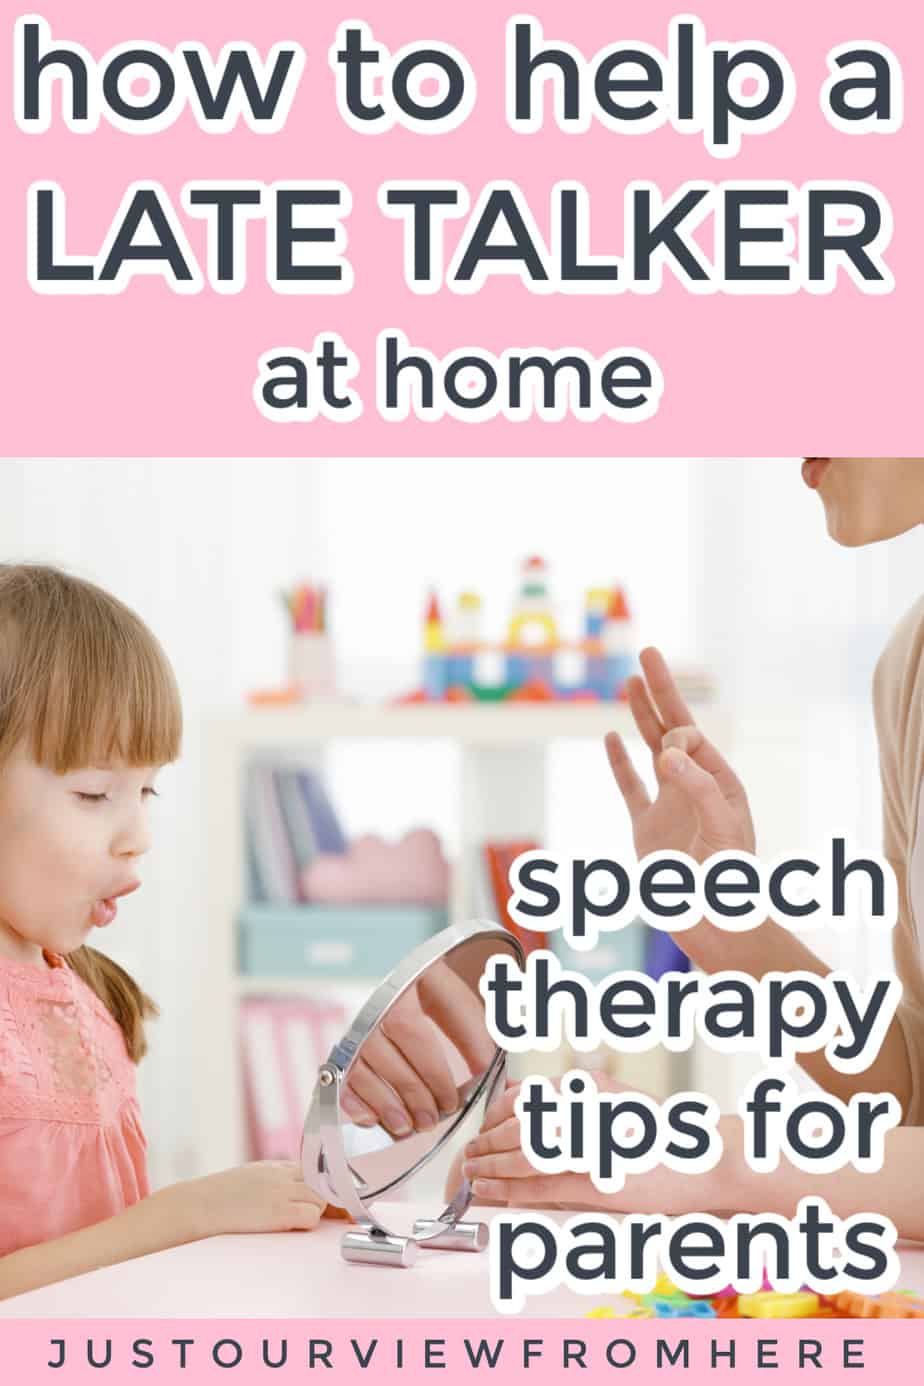 how can i help my late talker at home, speech therapy tips for parents